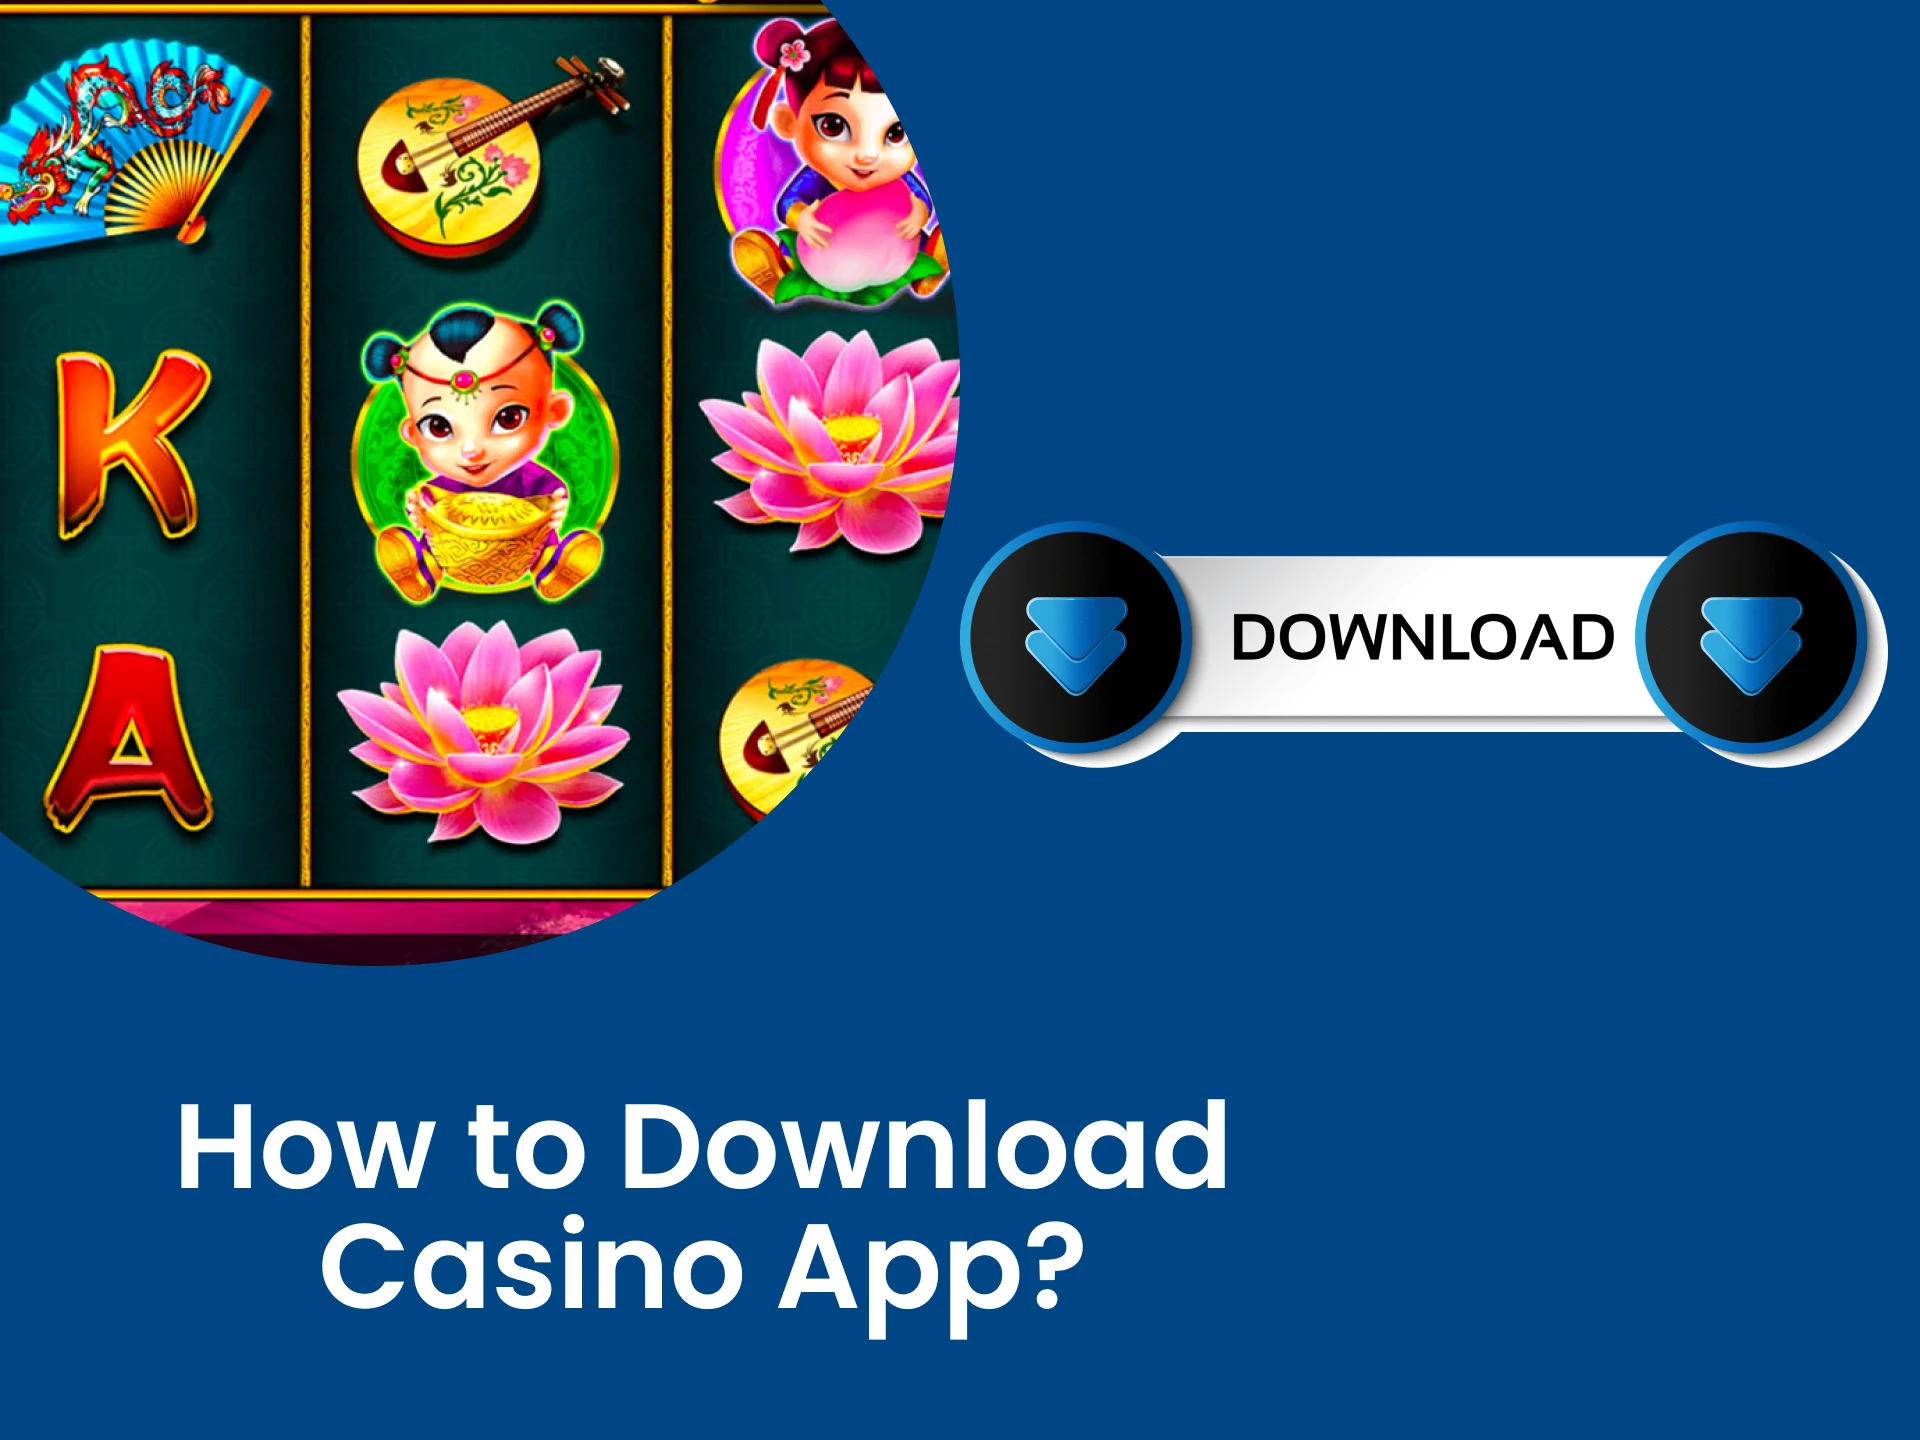 Download Android applications from the official casino websites.